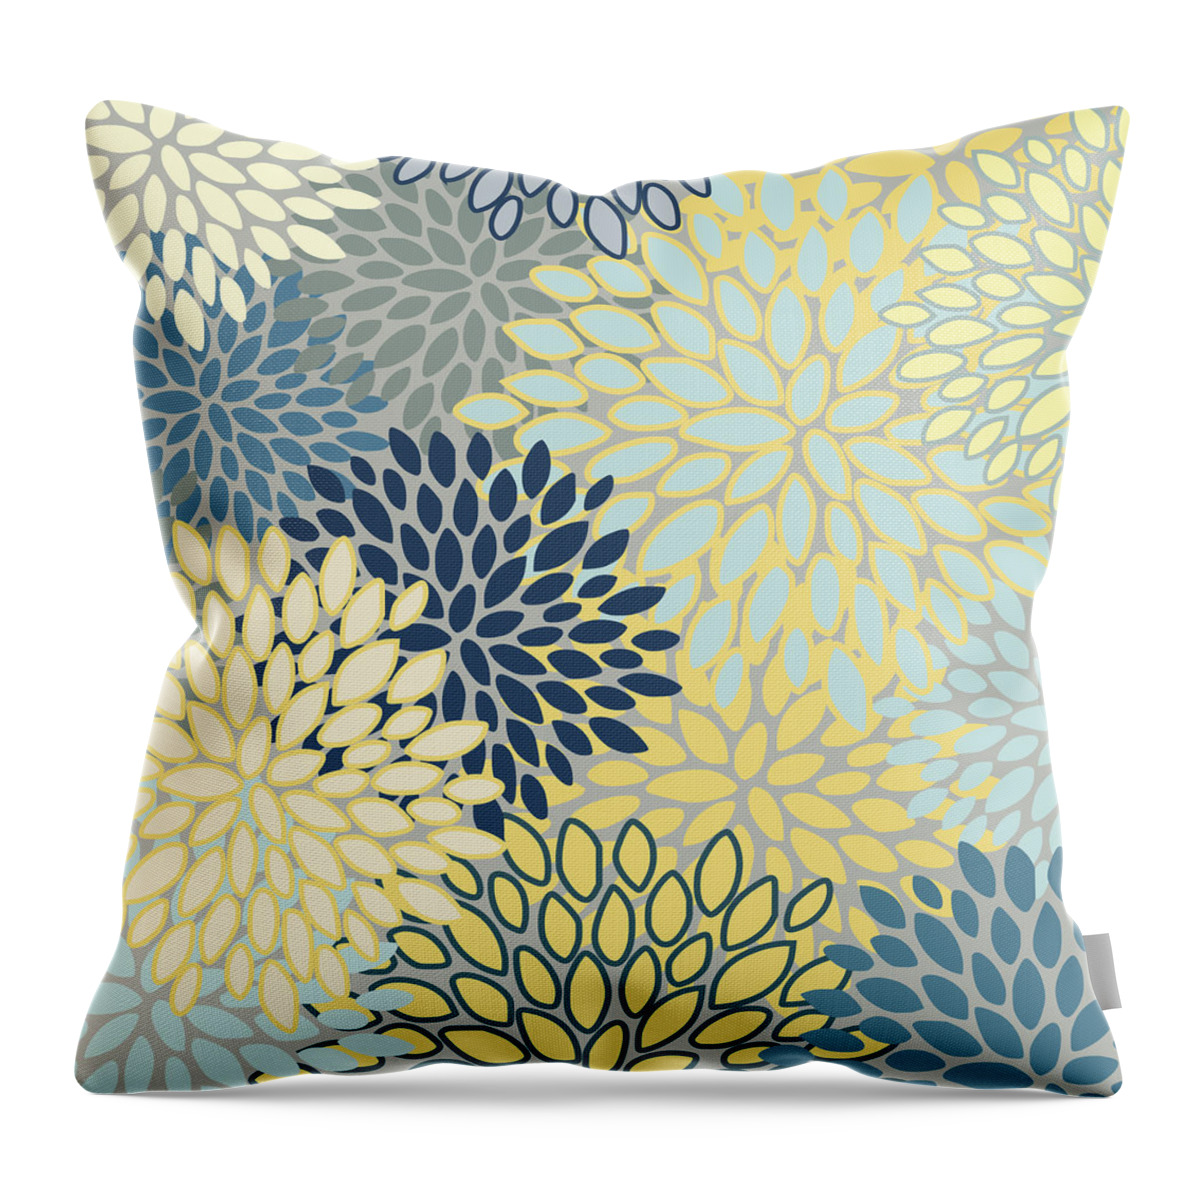 Floral Prints Gray and White by Megan Morris on Throw Pillow Yellow Society6 Modern 